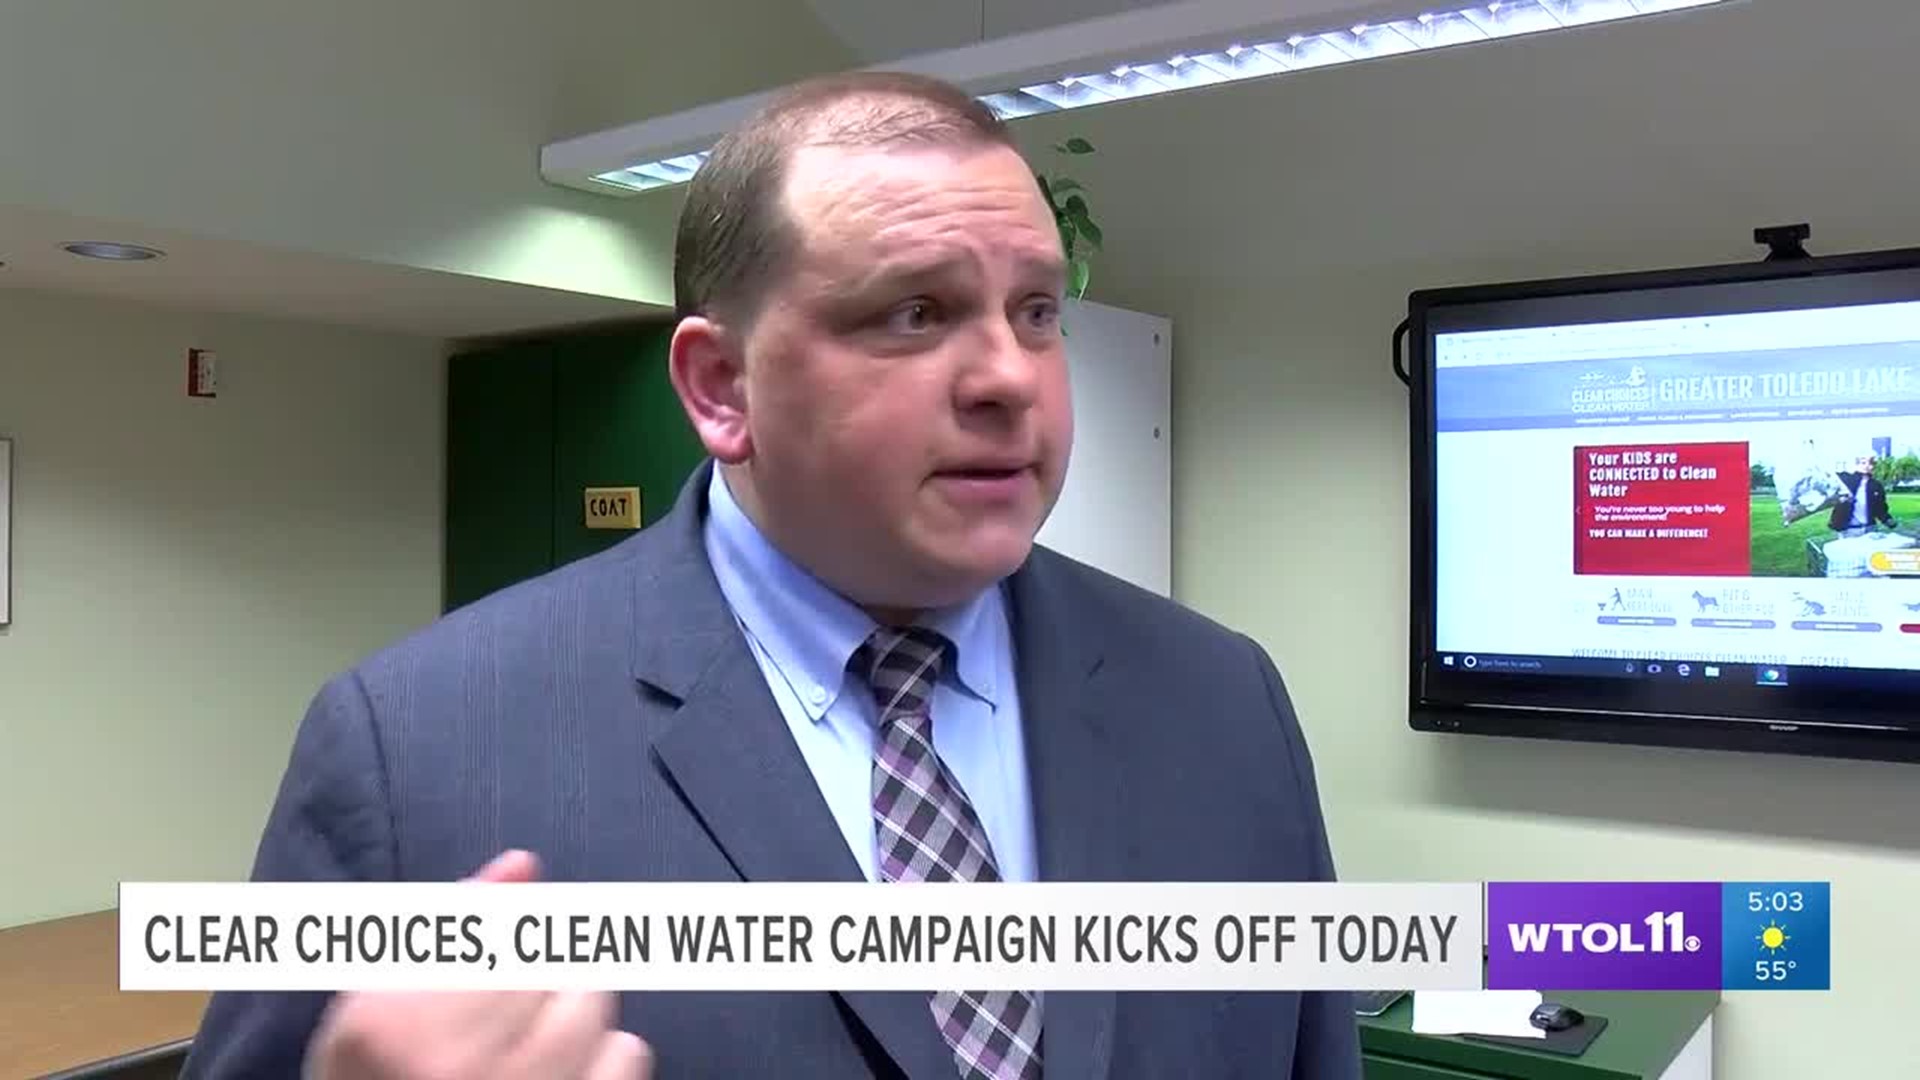 Toledo leaders introduce ‘Clear Choices, Clean Water’ campaign